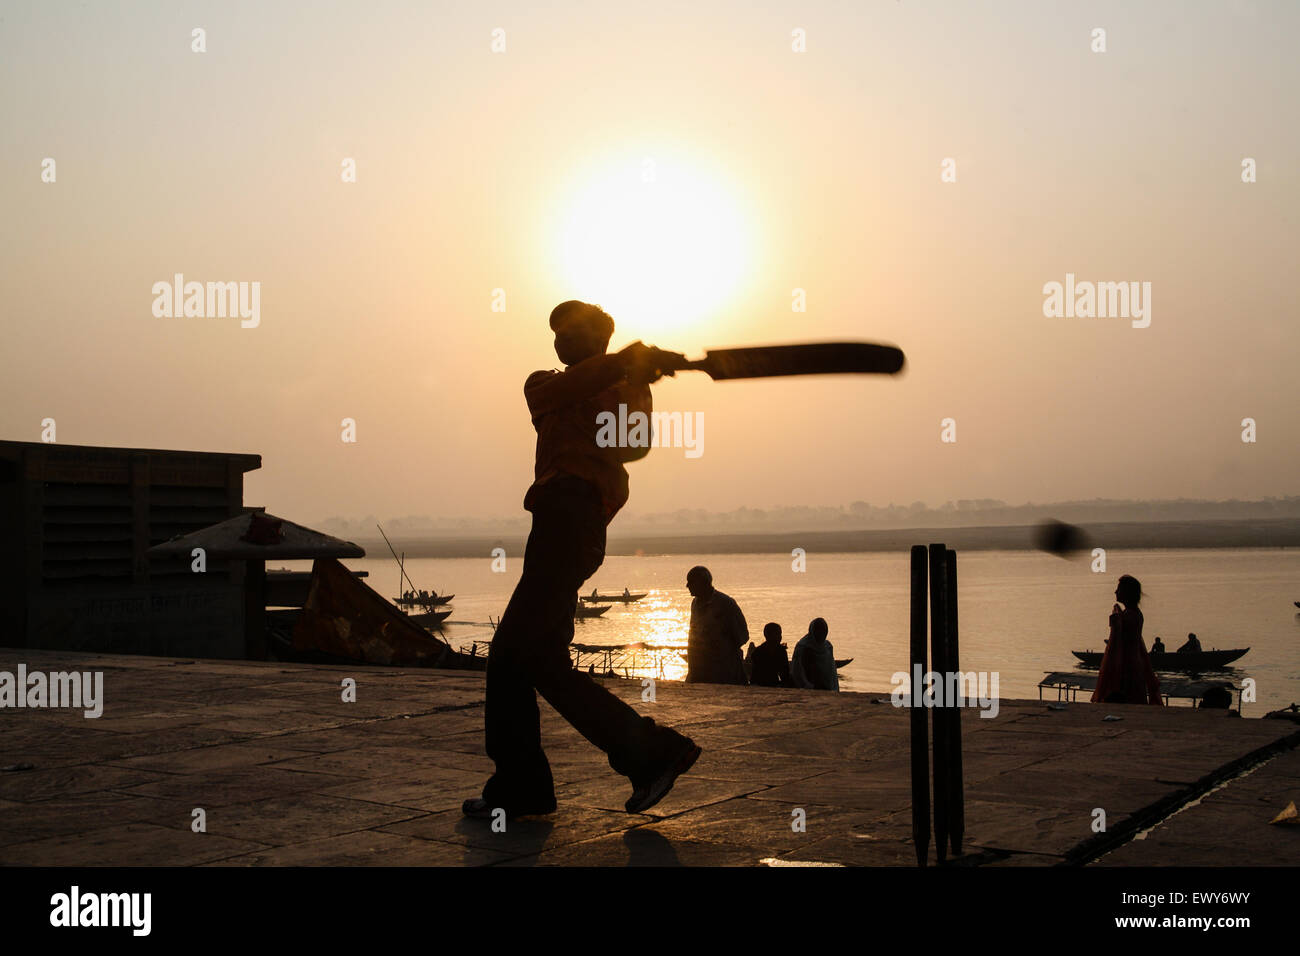 Local boys, on bathing ghat, playing popular national sport of cricket at sunrise. A good hit and the ball goes into the River Ganges. The culture of Varanasi is closely associated with the River Ganges and the river's religious importance.It is 'the religious capital of India'and an important pilgrimage destination.Varanasi, also known as Benares, an ancient city, one of the world's oldest continually inhabited cities, situated on the left/west bank of the sacred Ganges River. Regarded as holy by Hindus, Buddhists, and Jains. Uttar Pradesh State, India, Asia. Stock Photo